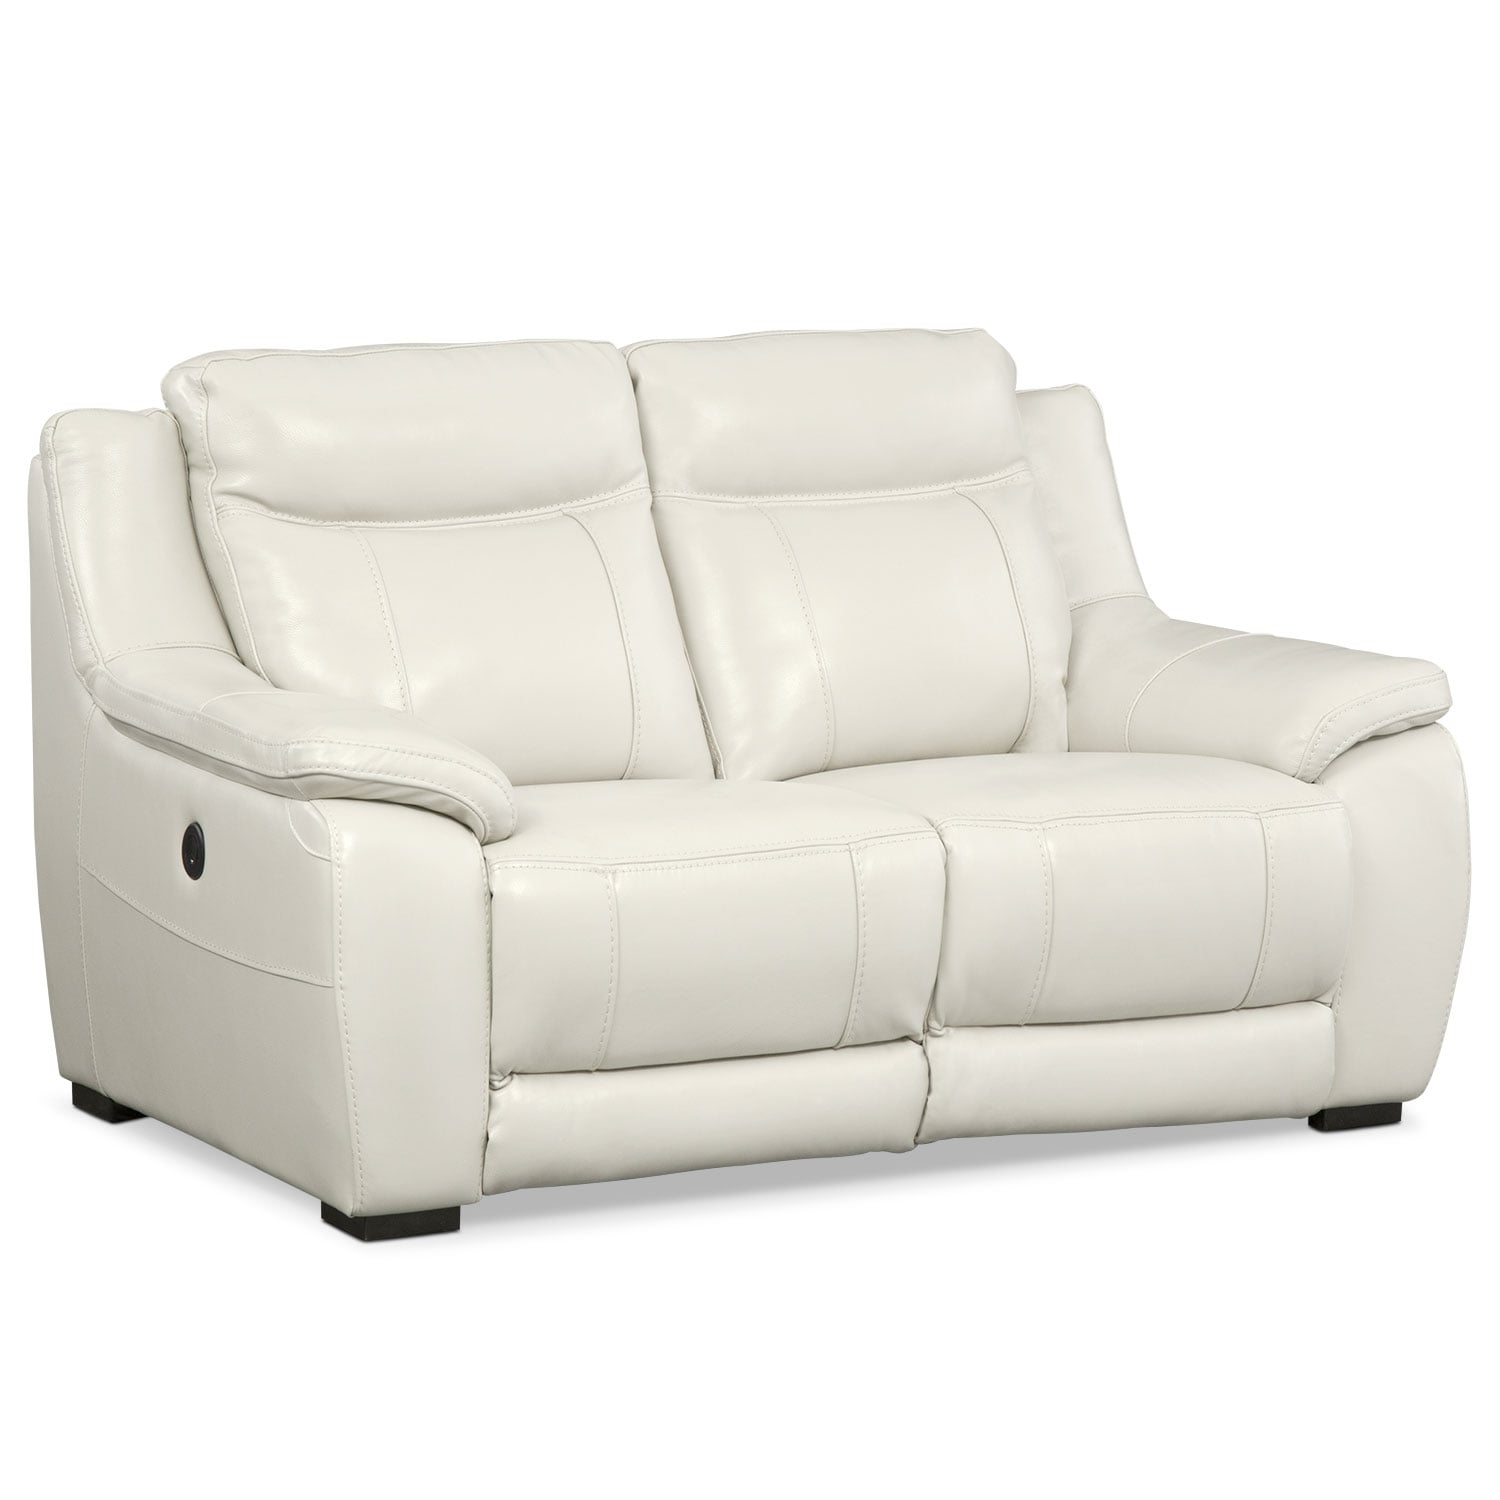 Lido Power Reclining Loveseat Ivory Value City Furniture